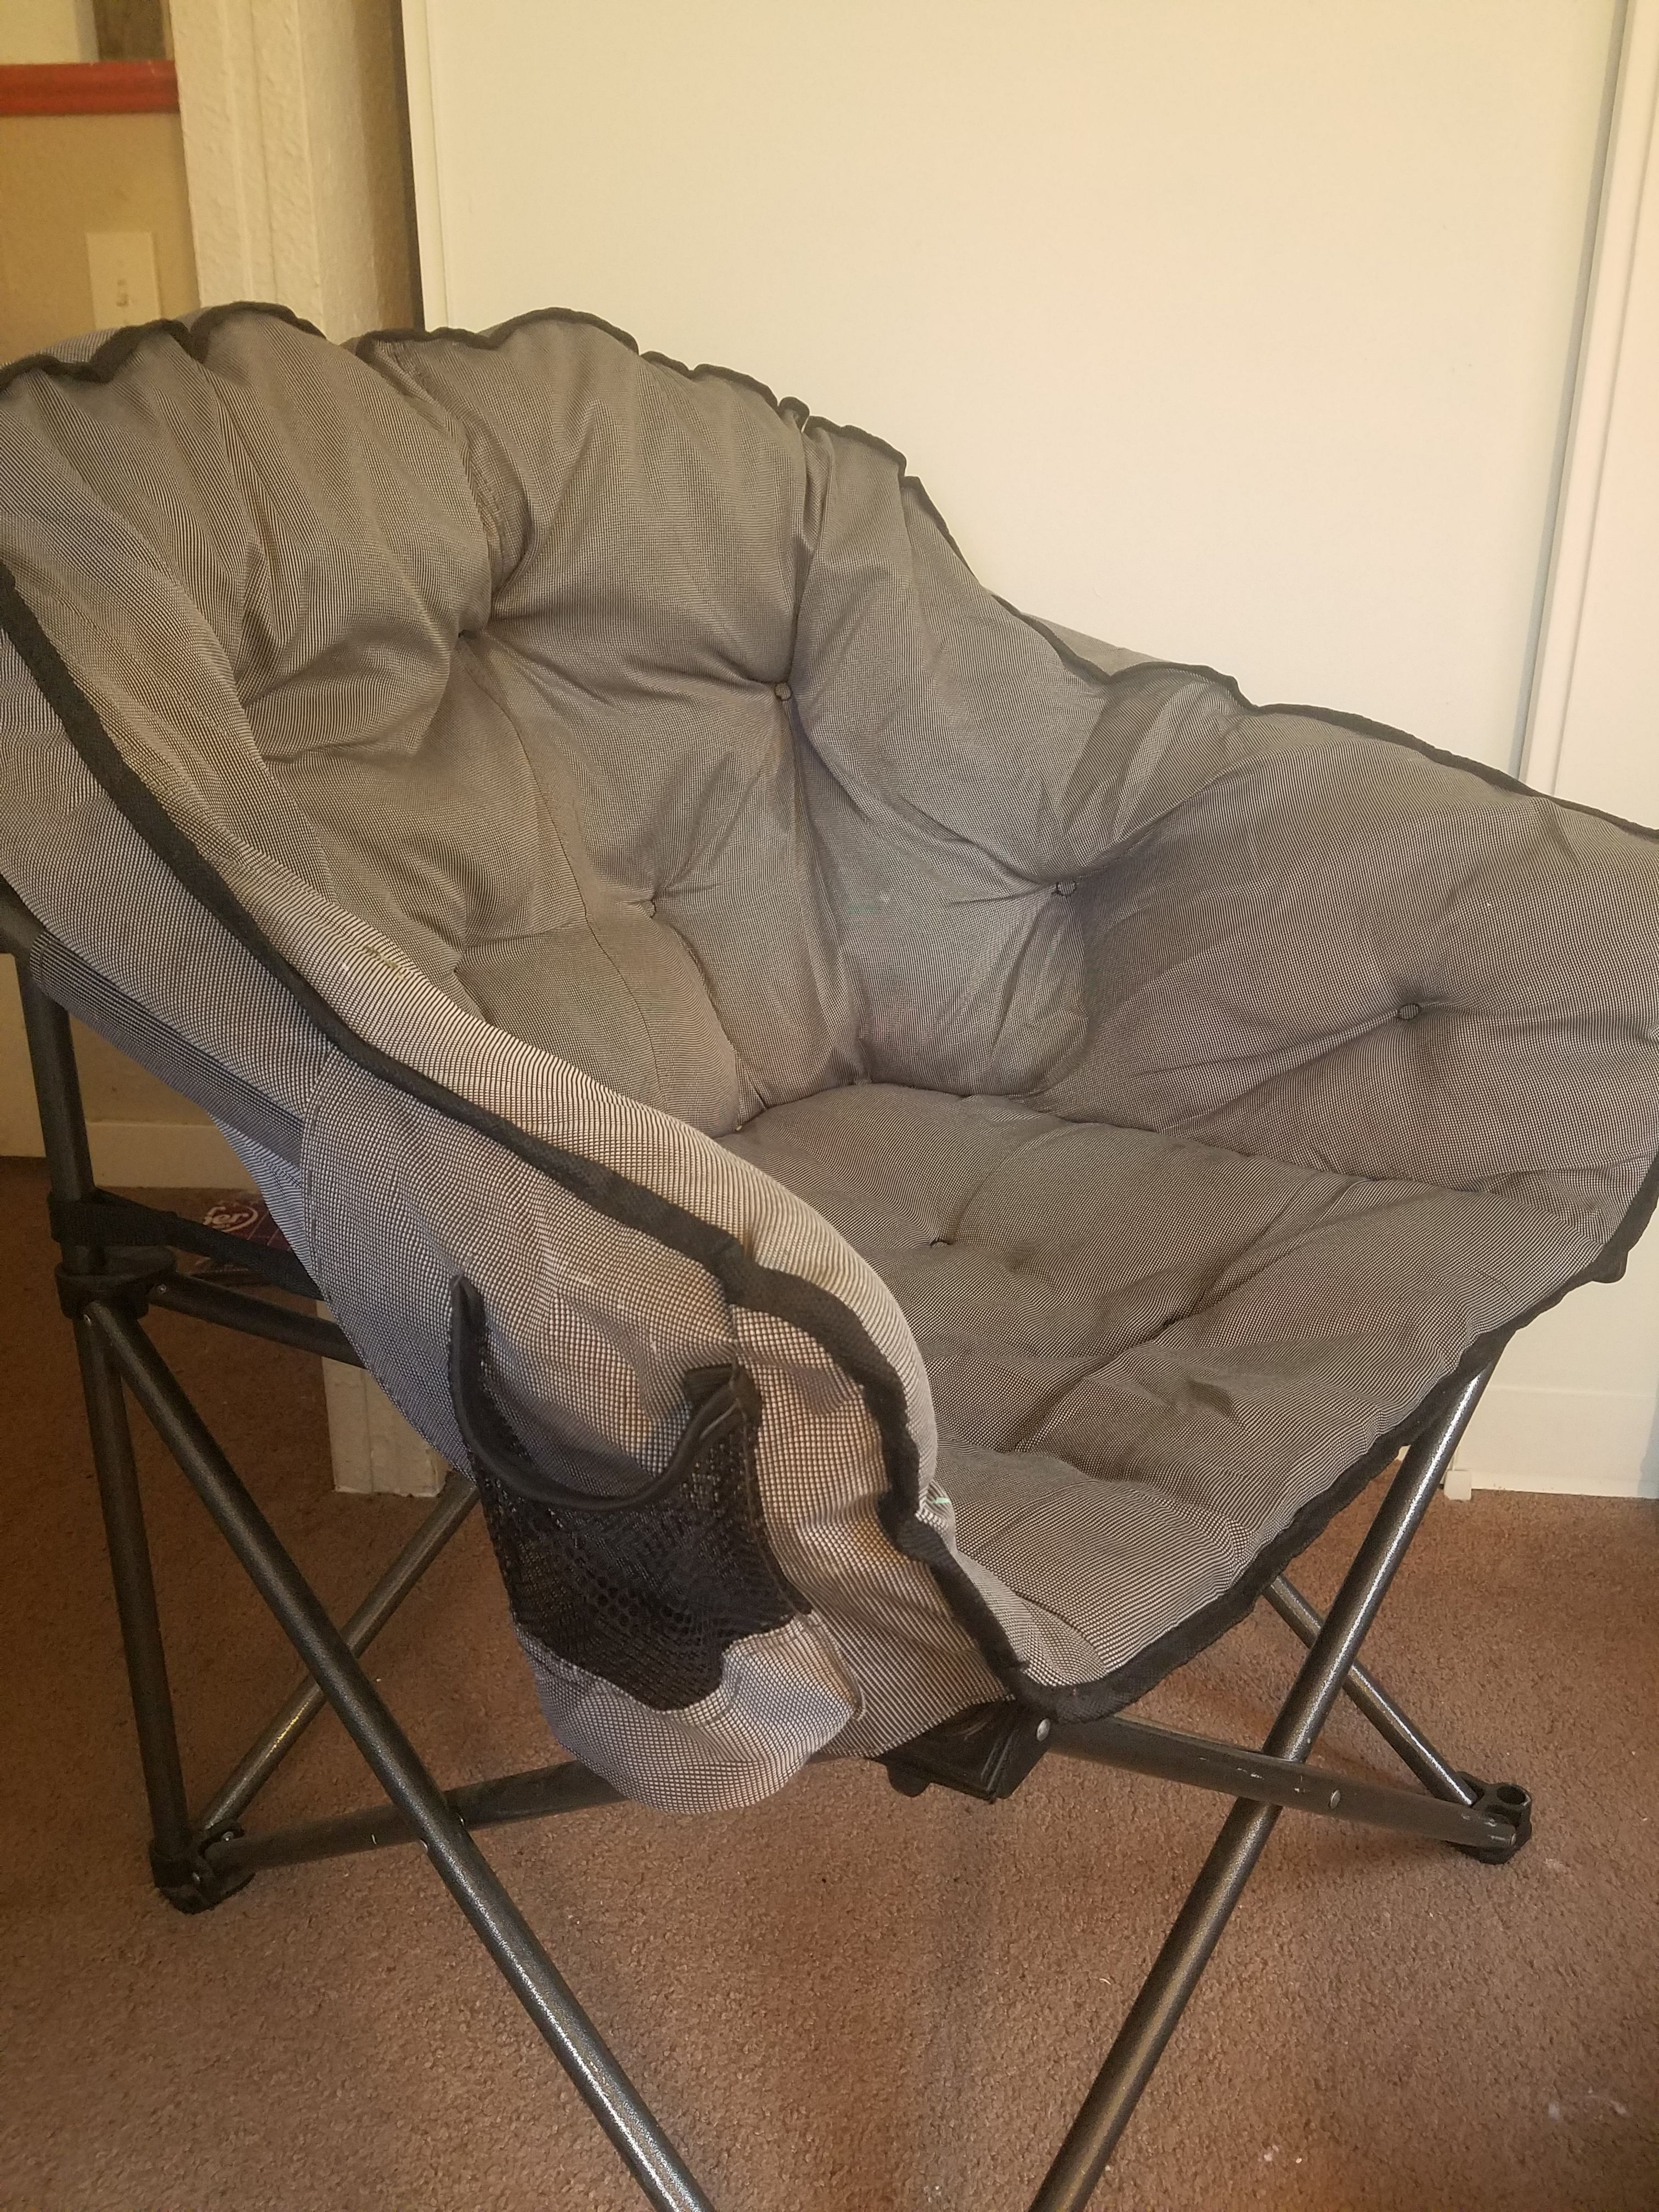 Costco 987742 Tofasco Extra Padded Club Chair For Sale In Ocean Shores